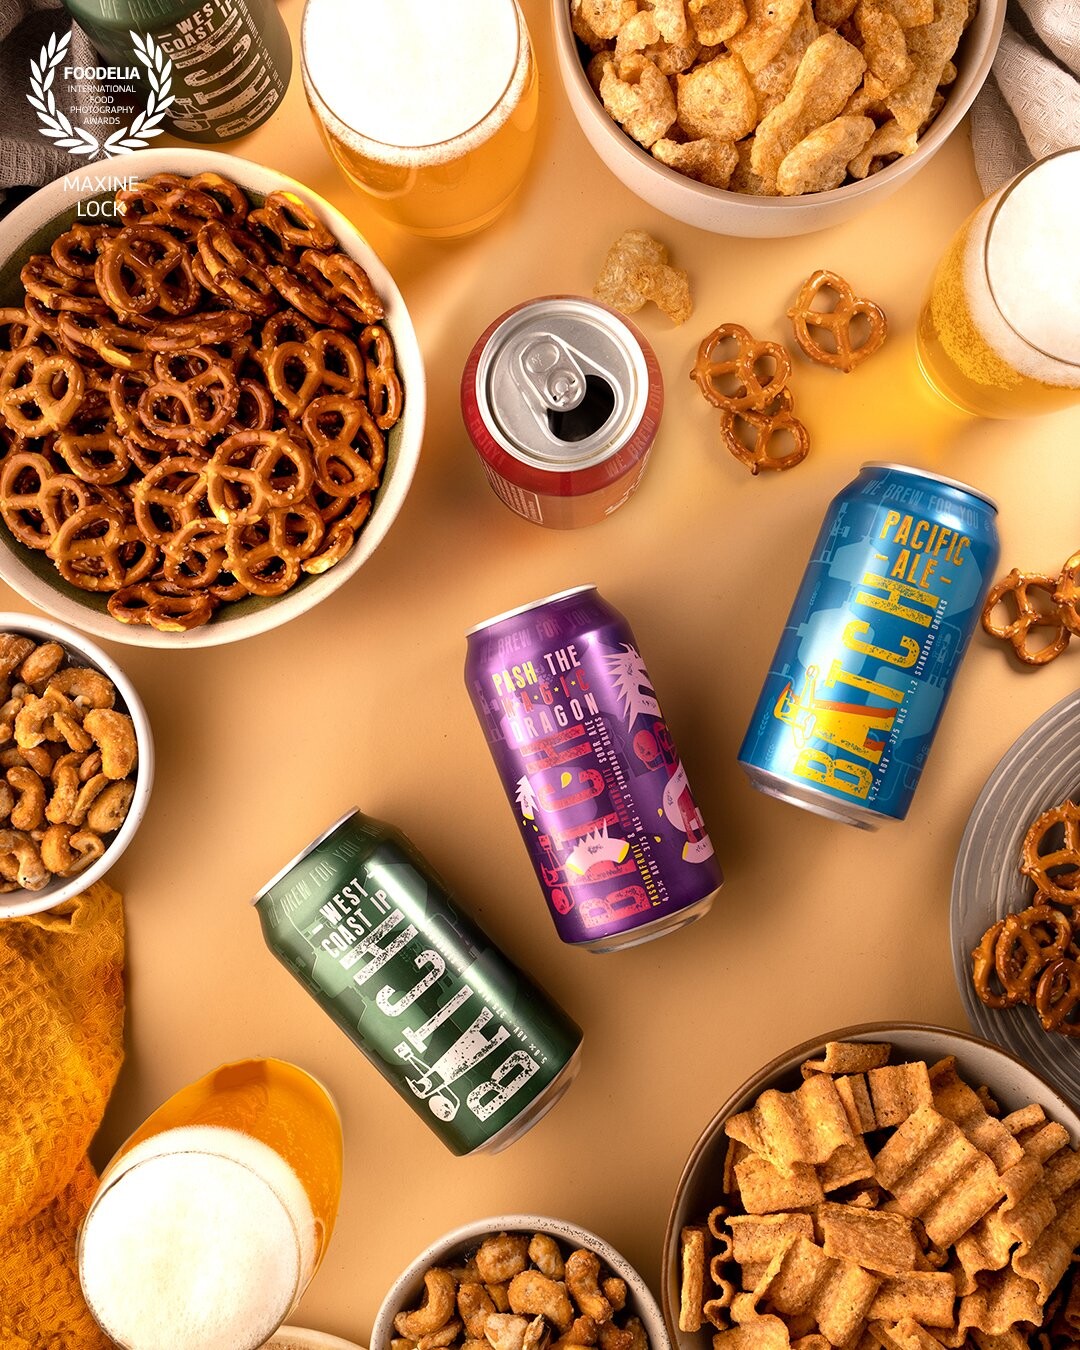 Beer photographed with both the cans itself, and the beer in glasses, with the image surrounded by nibbles that are usually served with beer.